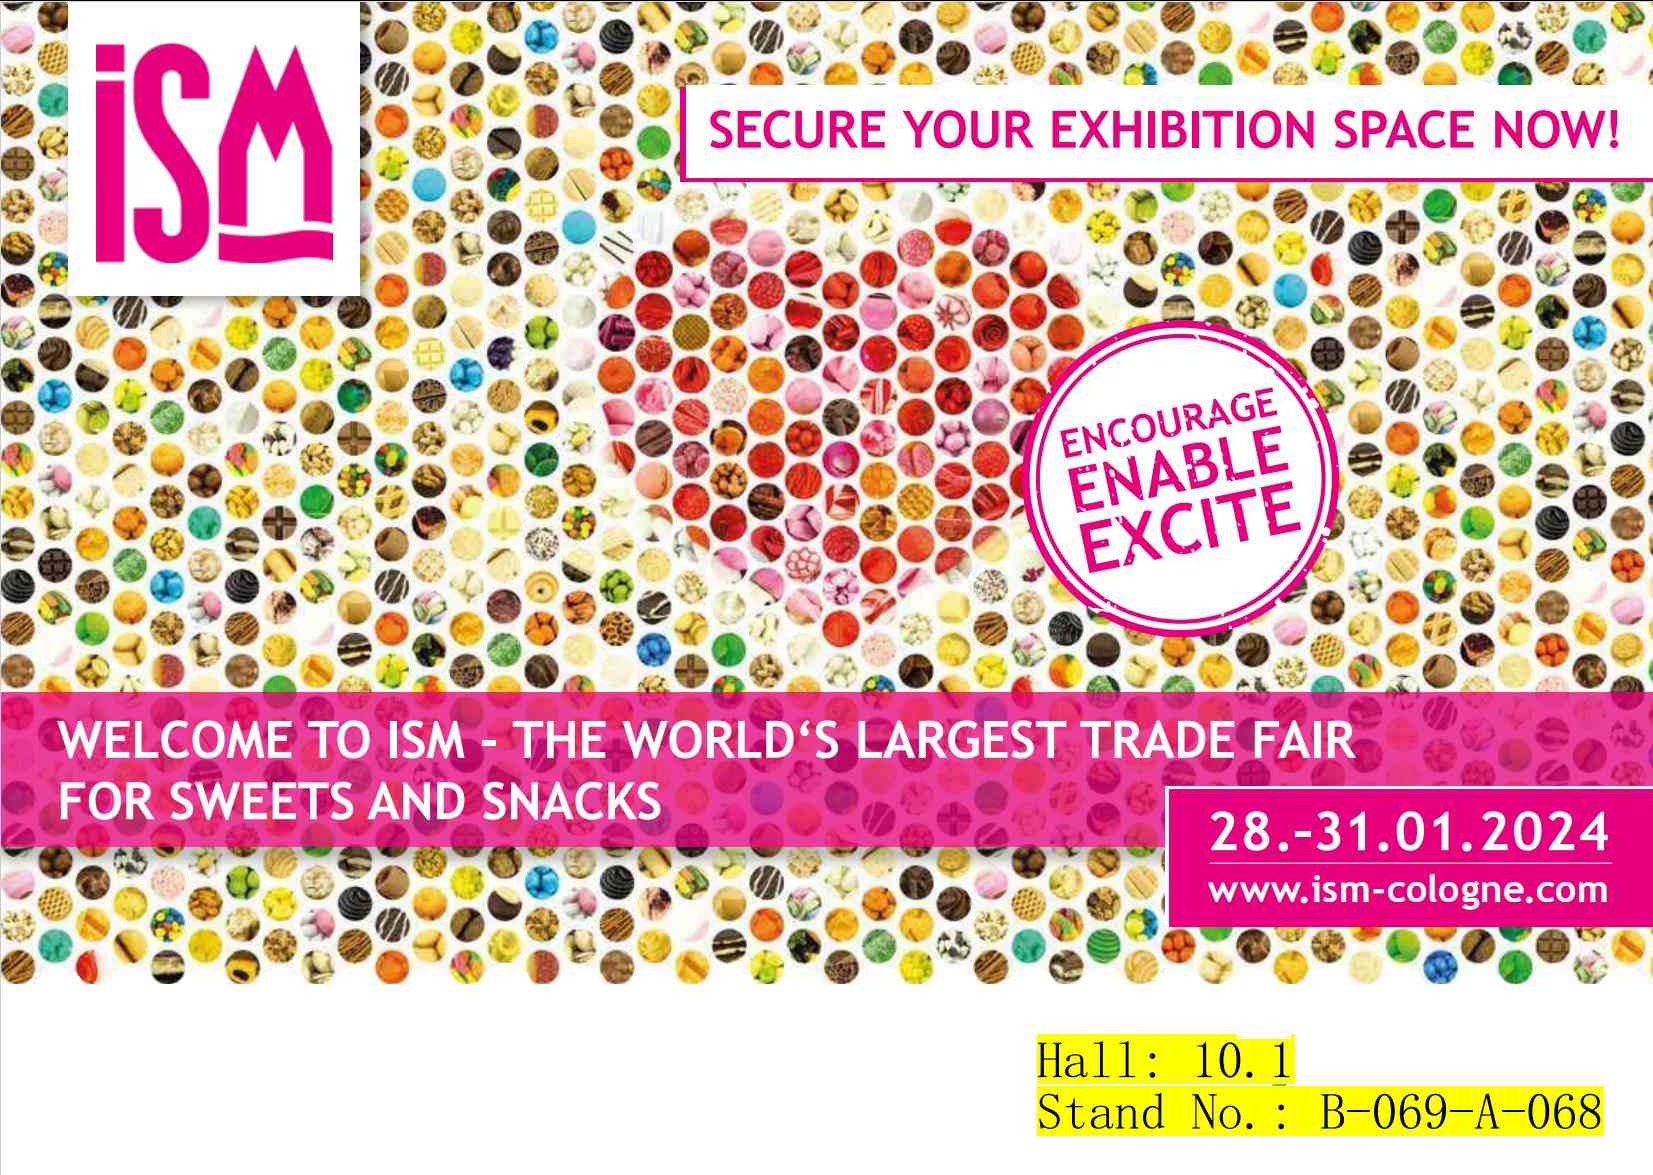 Join us at ISM Cologne, the world's premier sweets and snacks trade fair!